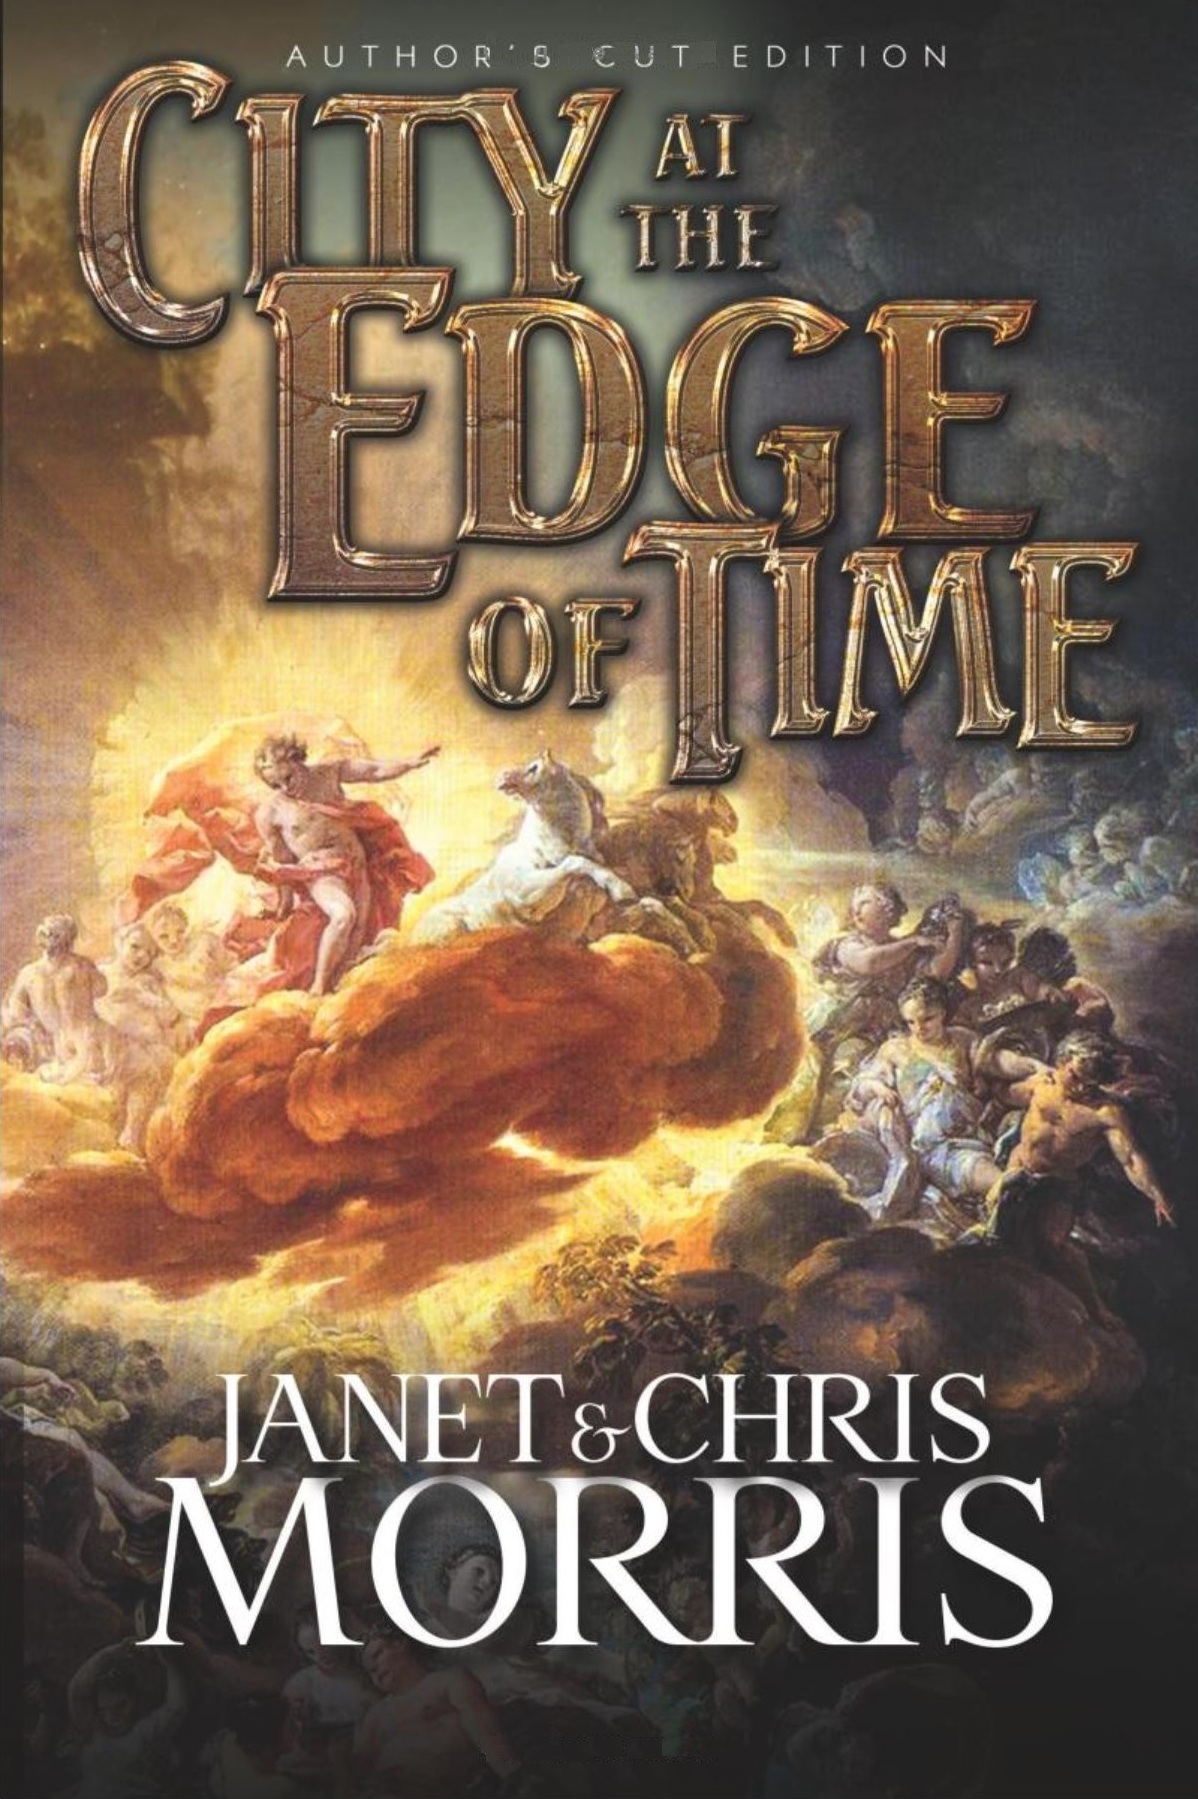 A City Eternal, Under Siege: City at the Edge of Time, by Janet & Chris ...